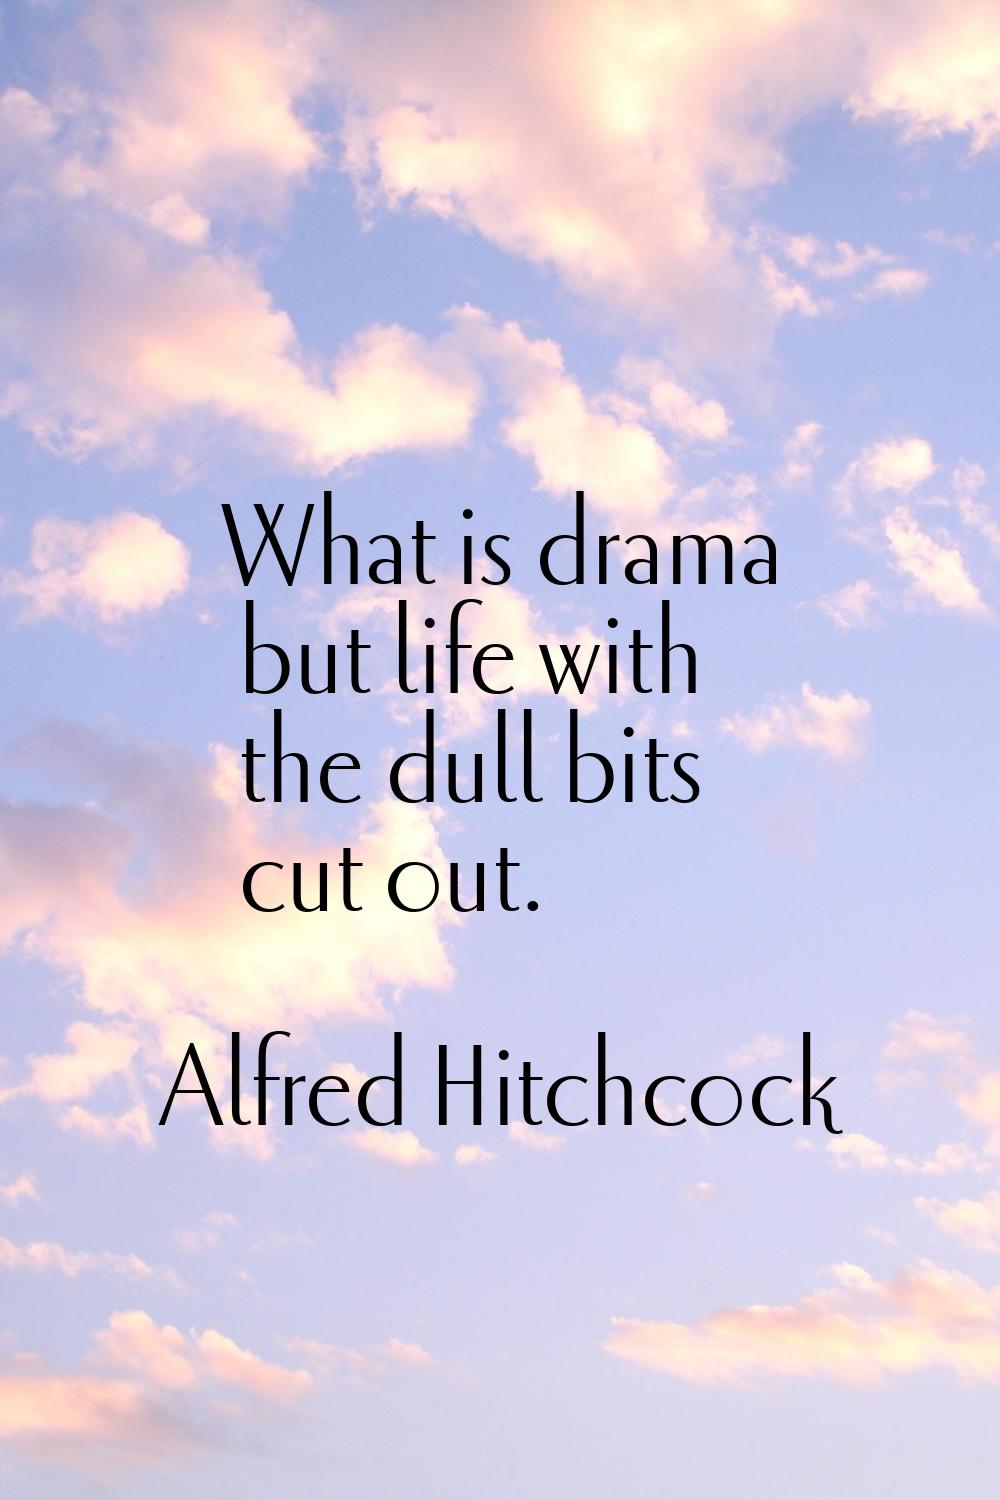 What is drama but life with the dull bits cut out.